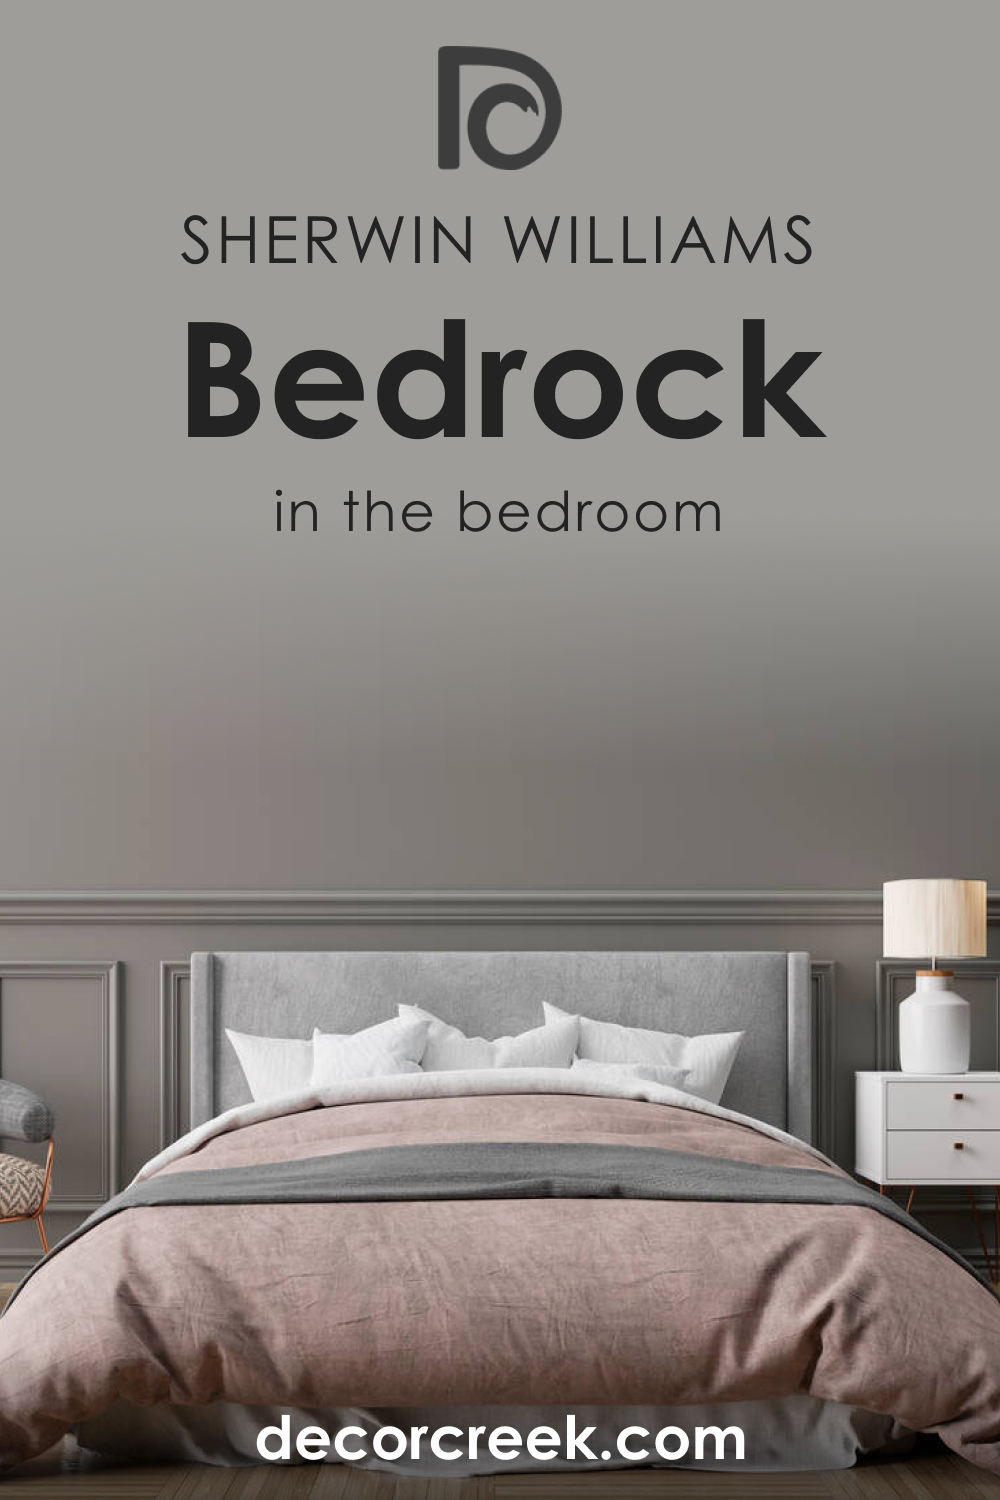 How to Use SW 9563 Bedrock in the Bedroom?